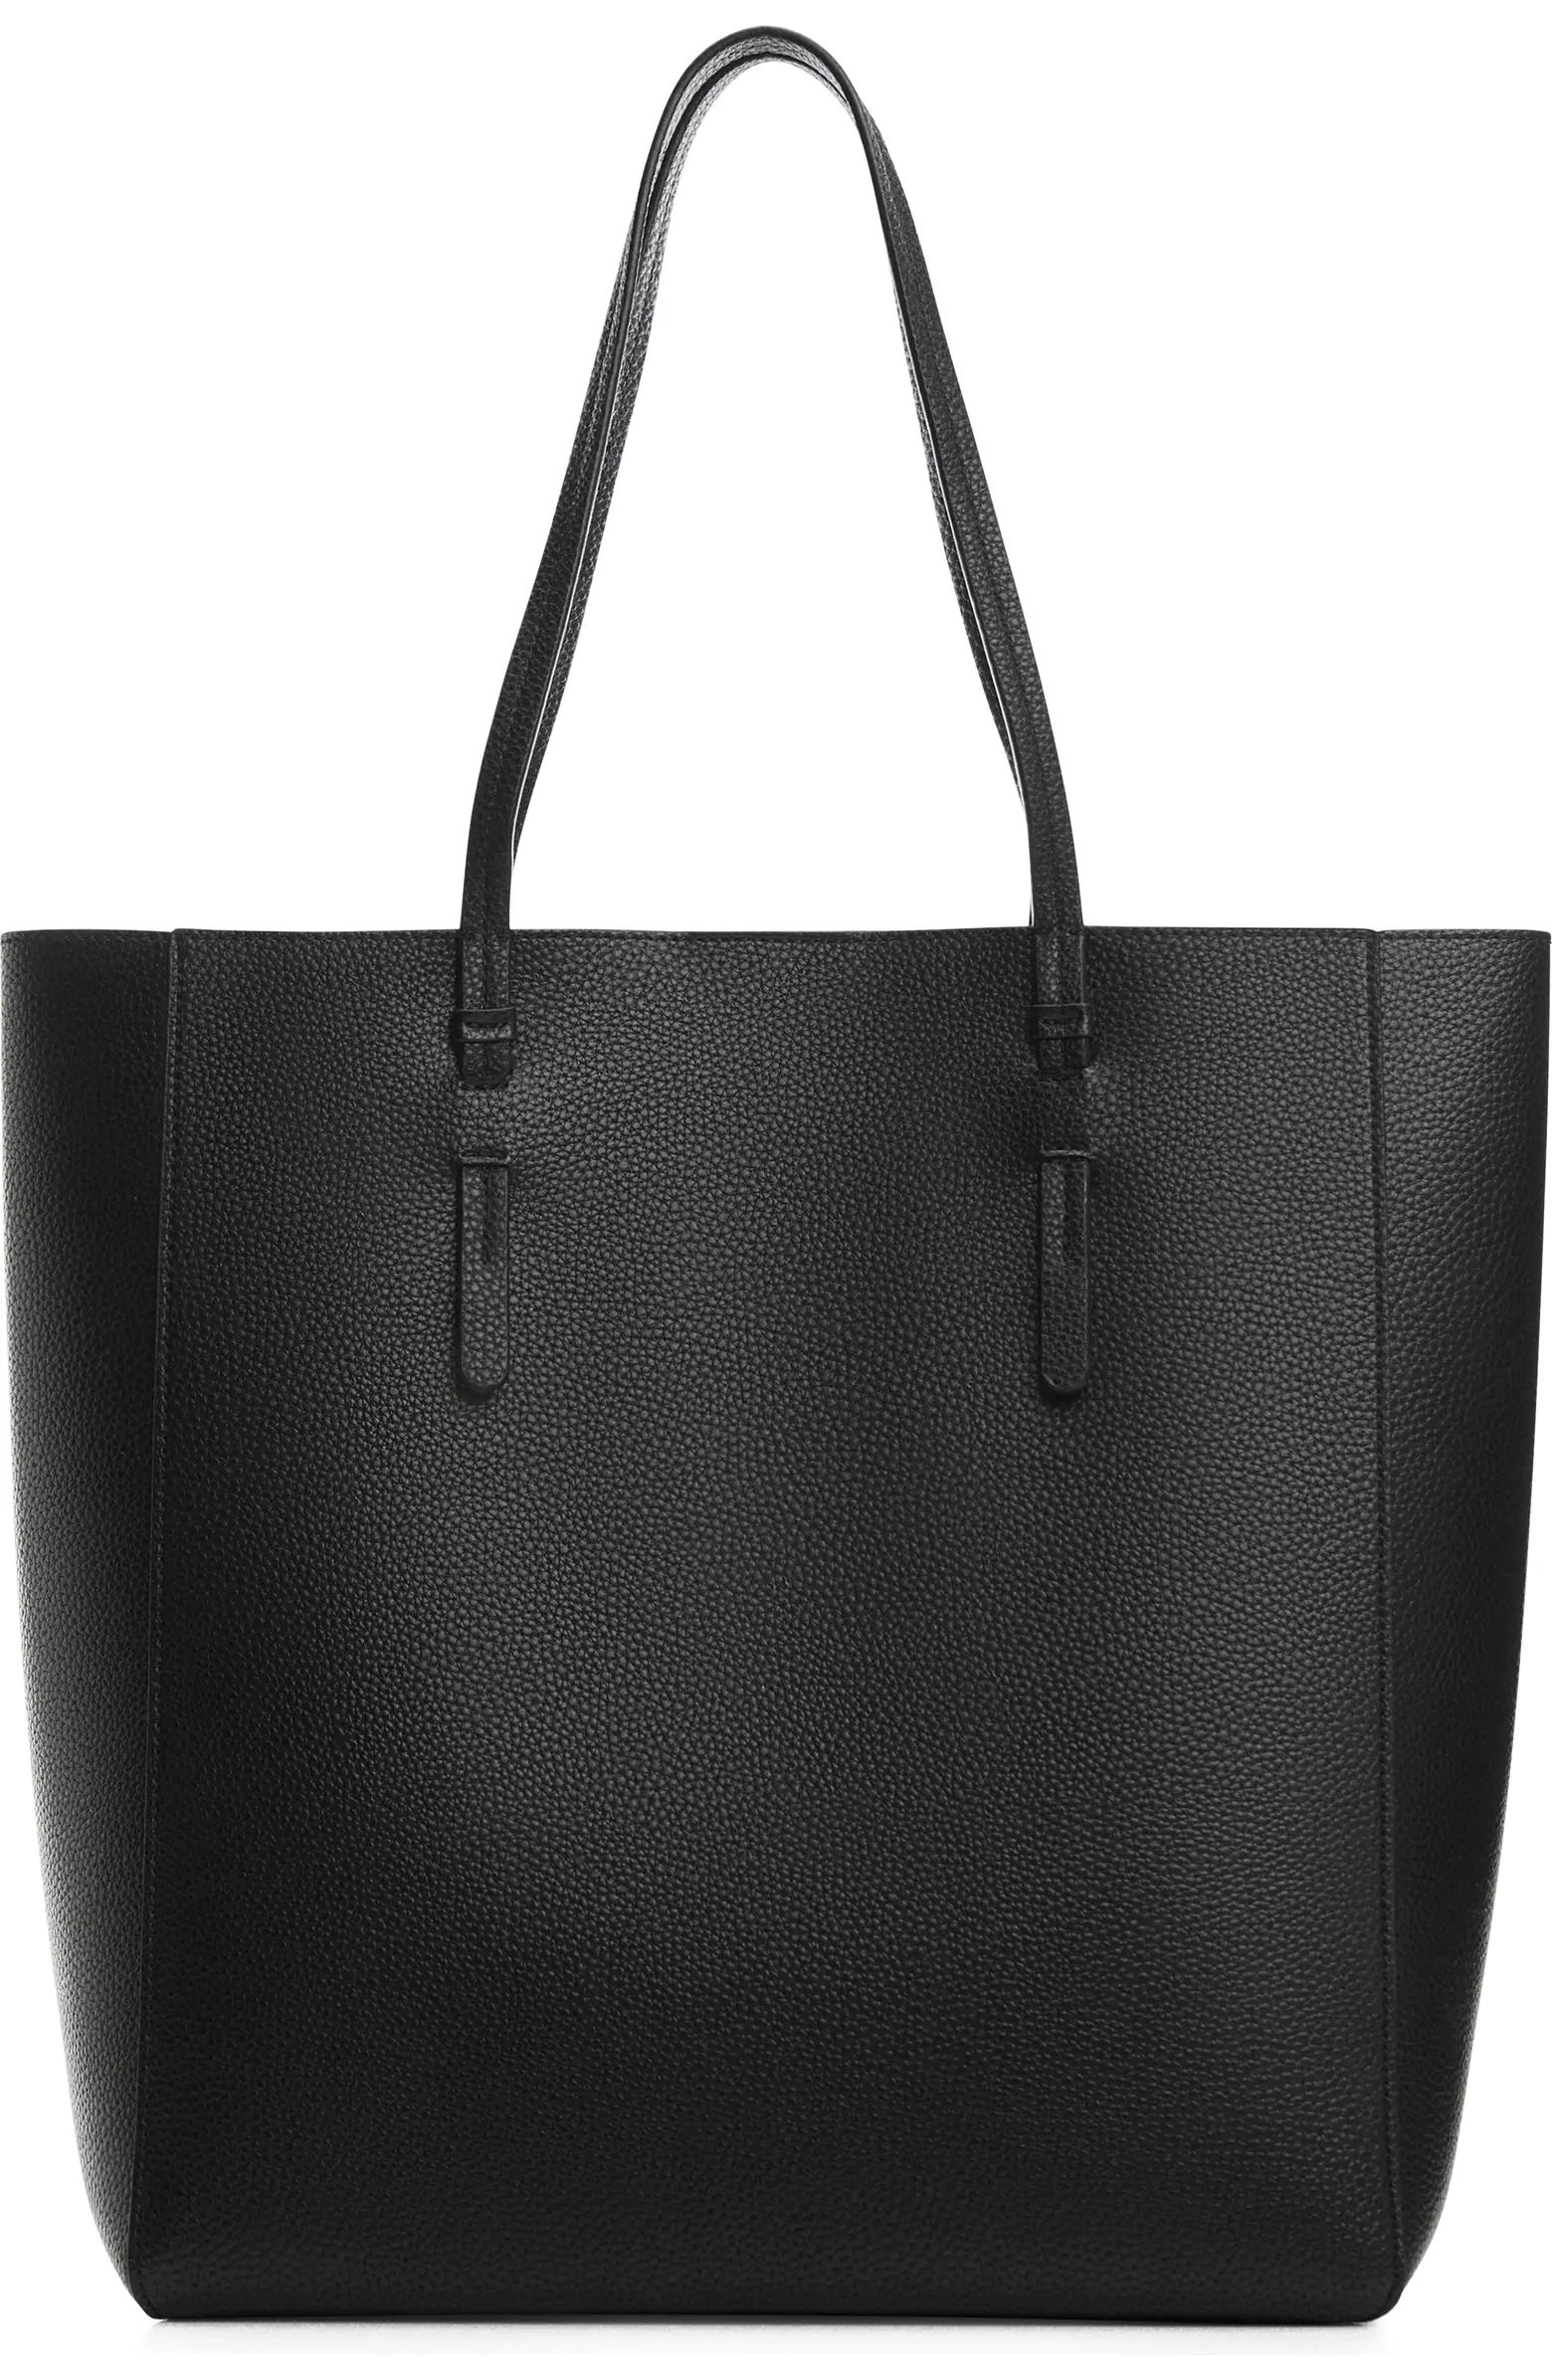 MANGO Faux Leather Shopper Tote | Nordstrom | Nordstrom